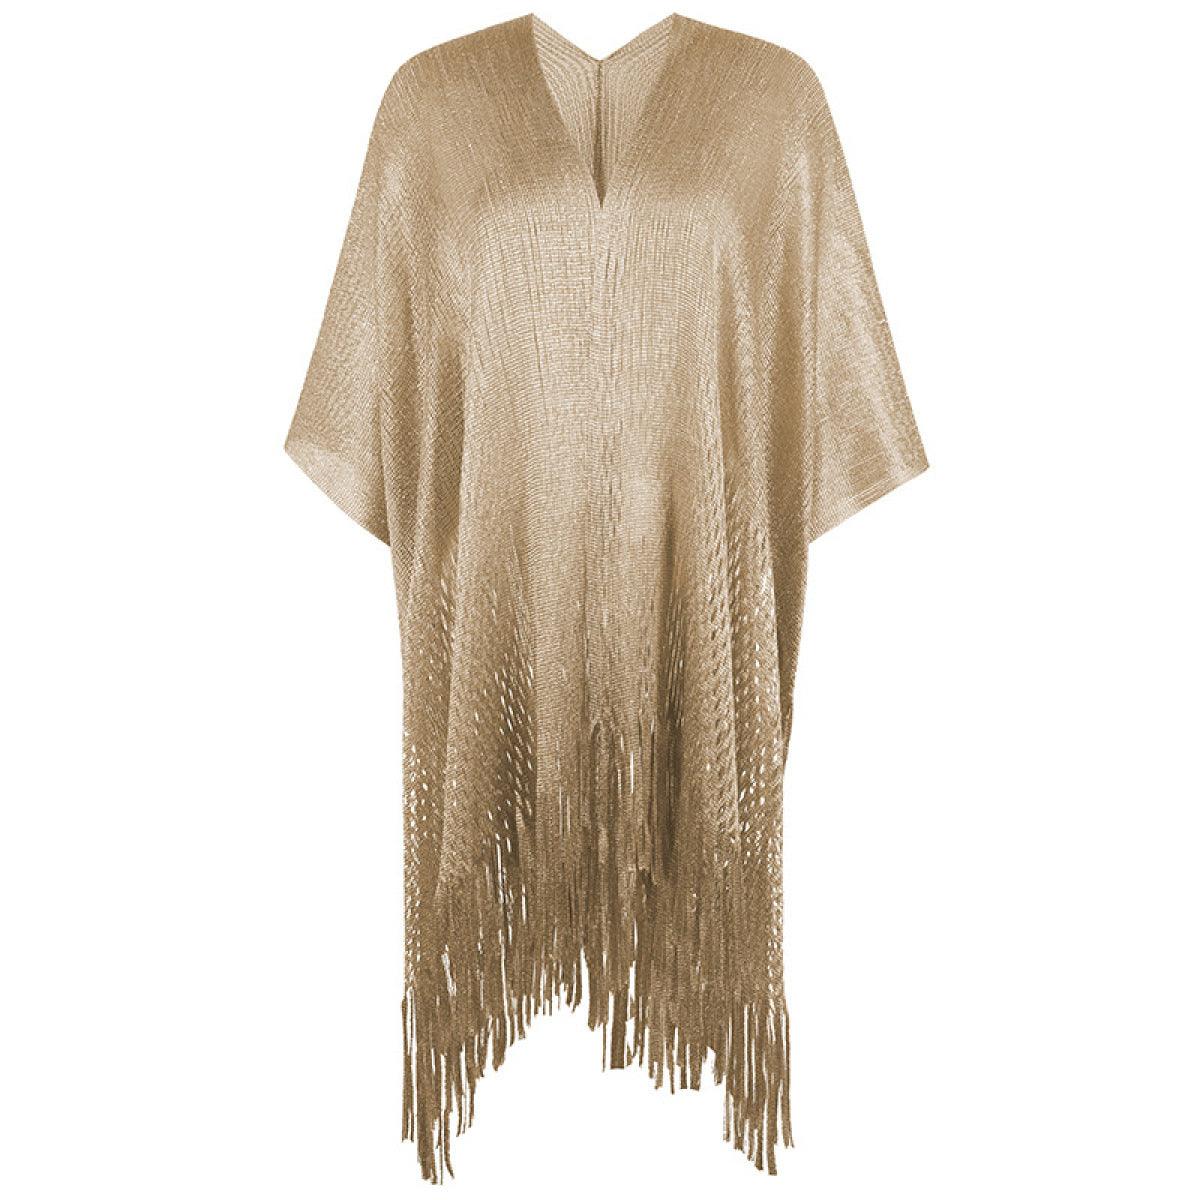 Chic & Stylish: Must-Have Kimono Fringe Cut Out Shawl for Summer